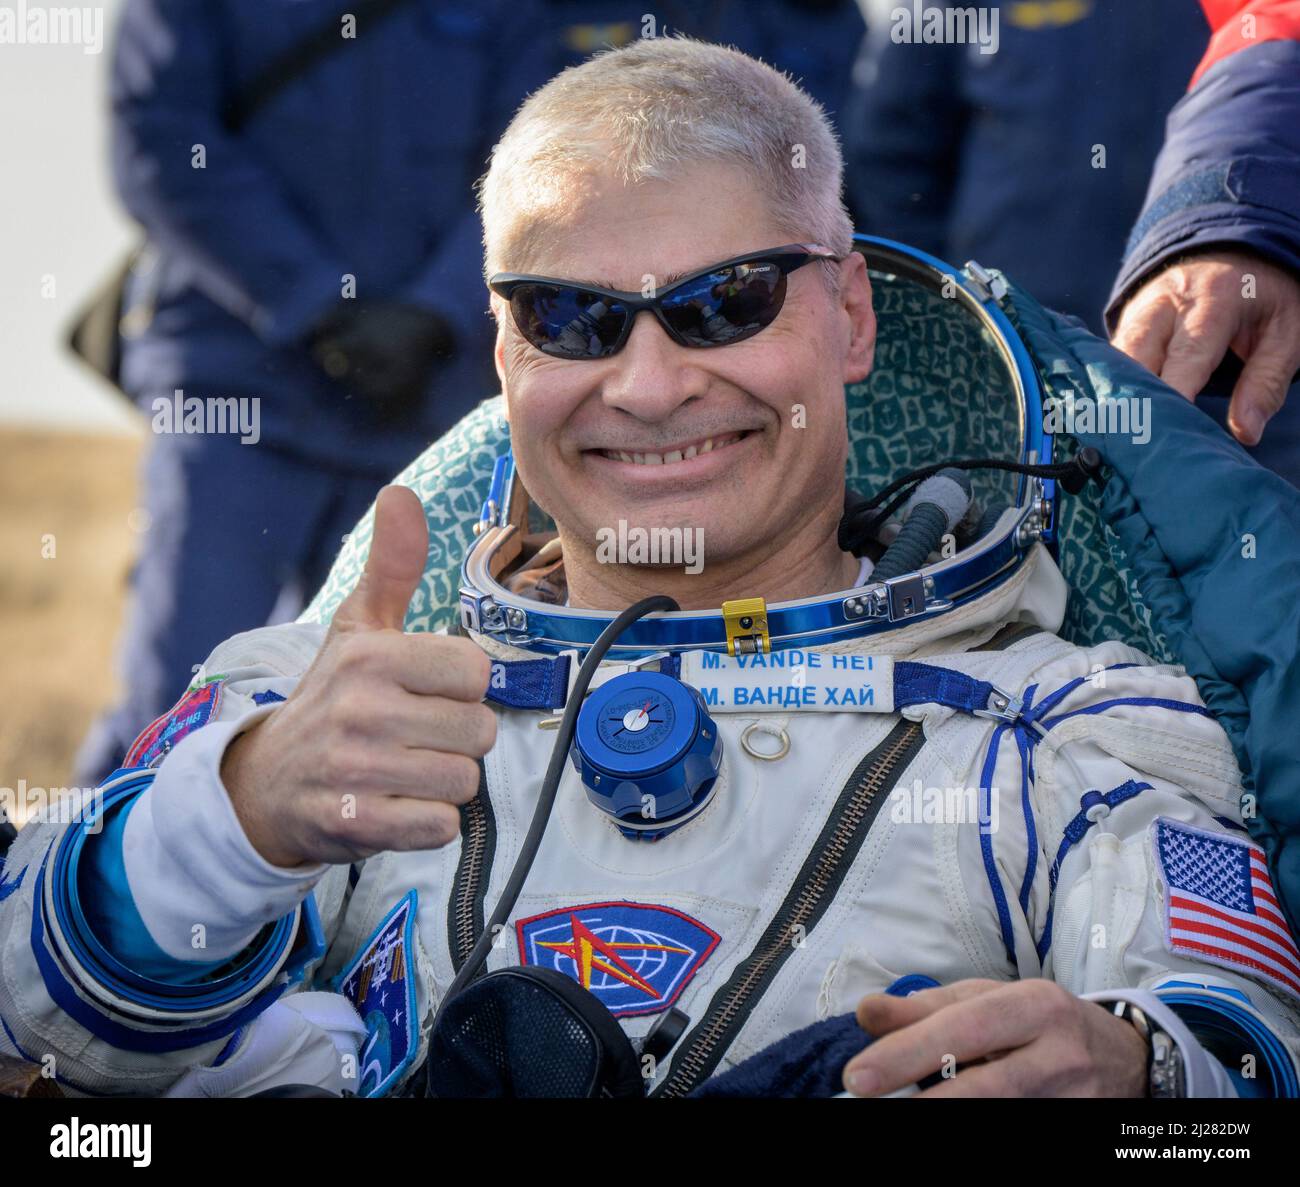 Zhezkazgan, Kazakhstan. 30th Mar, 2022. NASA astronaut Mark Vande Hei is seen outside the Soyuz MS-19 spacecraft after he landed with Russian cosmonauts Anton Shkaplerov and Pyotr Dubrov in a remote area near the town of Zhezkazgan, Kazakhstan on Wednesday, March 30, 2022. Vande Hei and Dubrov are returning to Earth after logging 355 days in space as members of Expeditions 64-66 aboard the International Space Station. Credit: UPI/Alamy Live News Stock Photo